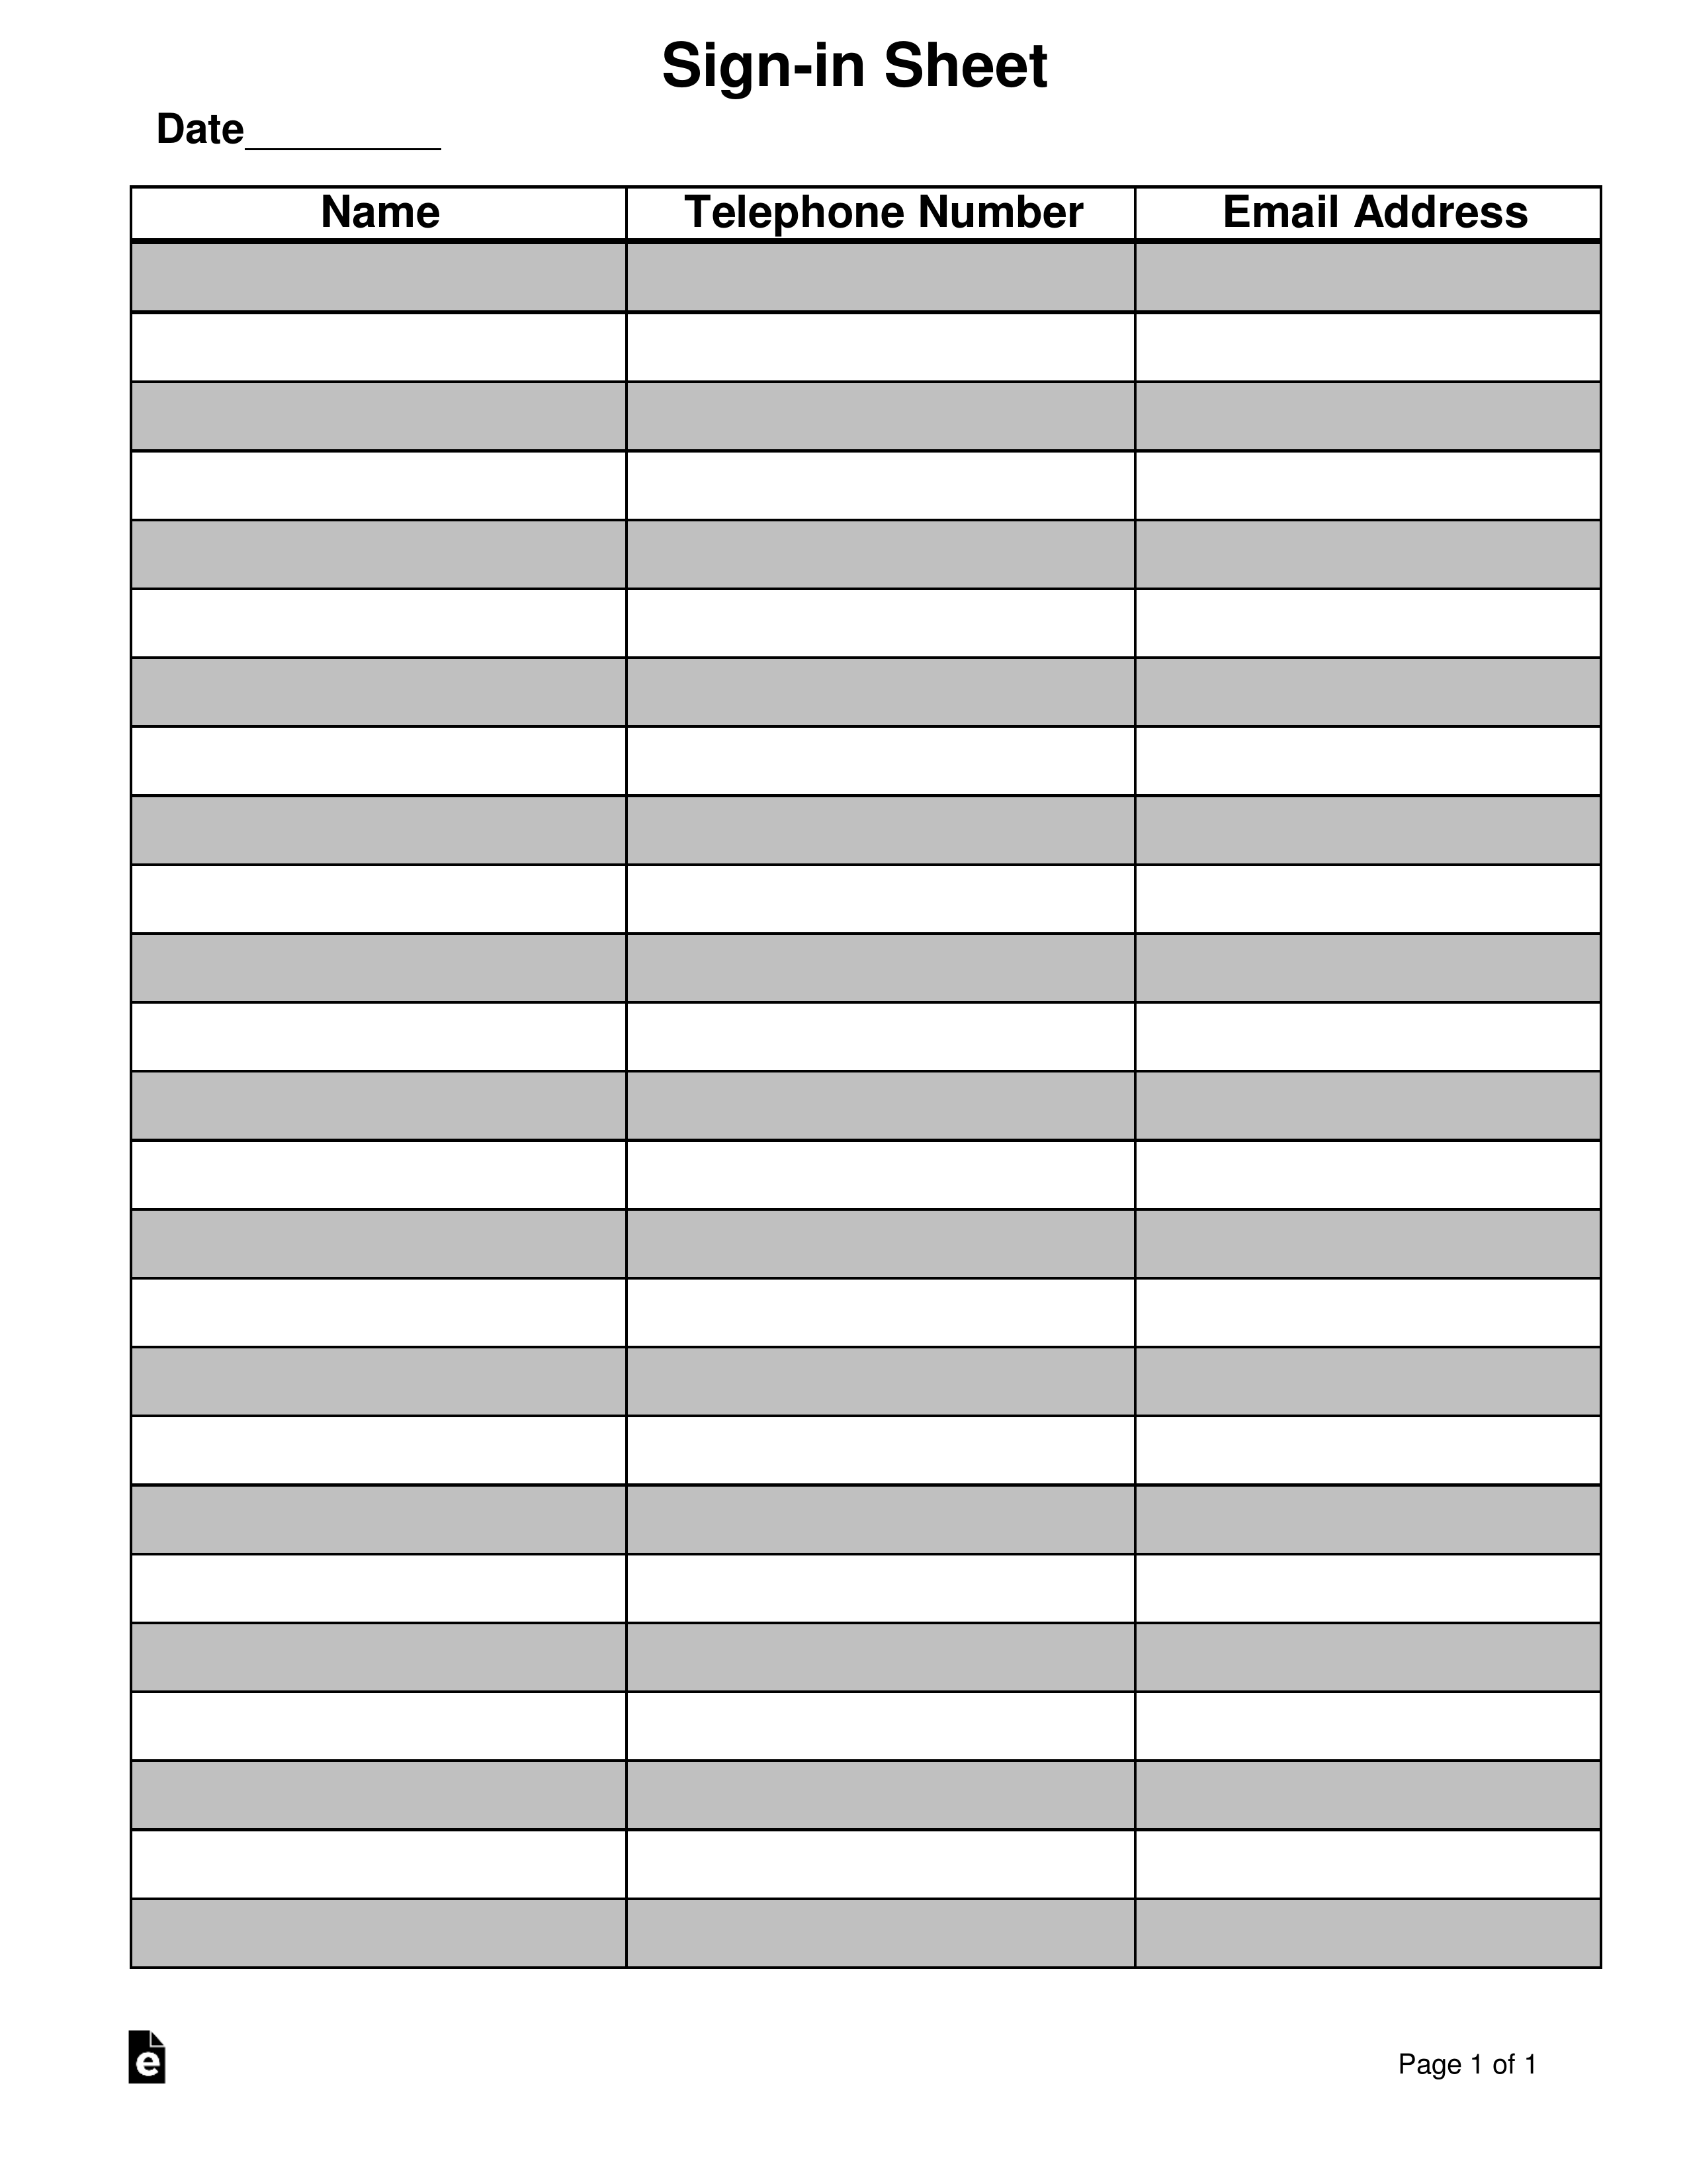 free-attendance-guest-sign-in-sheet-template-pdf-word-eforms